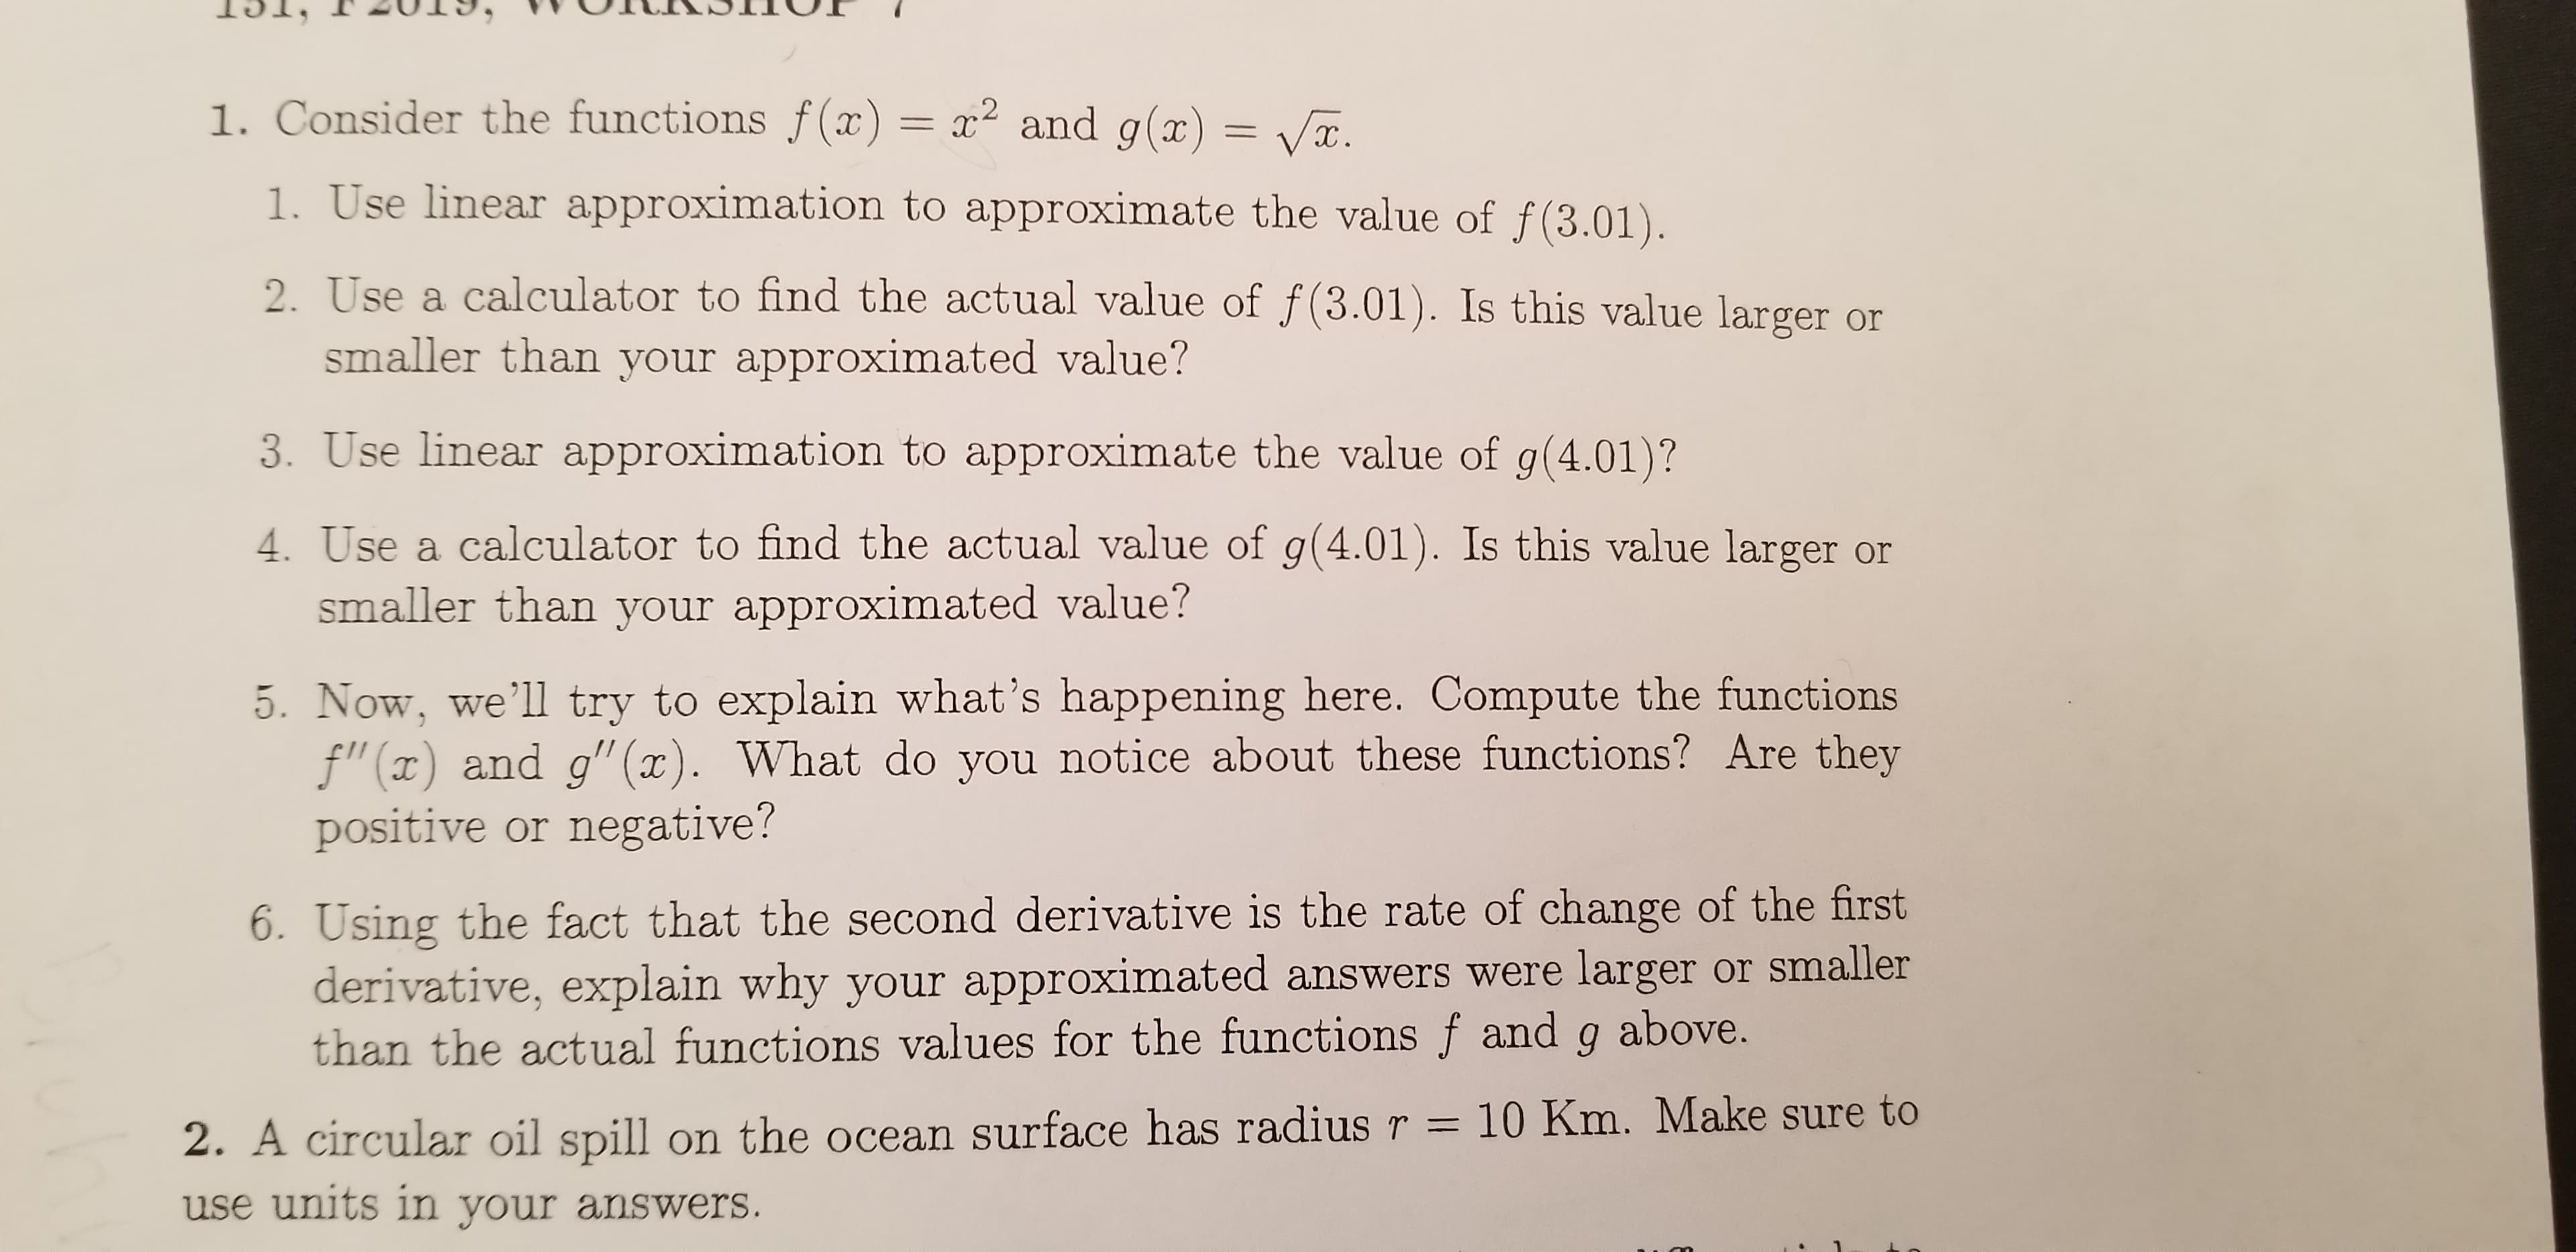 1. Consider the functions f (x) = x2 and g(x) = .
1. Use linear approximation to approximate the value of f(3.01).
2. Use a calculator to find the actual value of f(3.01). Is this value larger
smaller than your approximated value?
3. Use linear approximation to approximate the value of g(4.01)?
calculator to find the actual value of g(4.01). Is this value larger
smaller than your approximated value?
5. Now, we'll try to explain what's happening here. Compute the functions
f" (x) and g" (x). What do you notice about these functions? Are they
positive or negative?
6. Using the fact that the second derivative is the rate of change of the first
derivative, explain why your approximated answers were larger or smaller
than the actual functions values for the functions f and g above.
10 Km. Make sure to
2. A circular oil spill on the ocean surface has radius r
use units in your answers.
